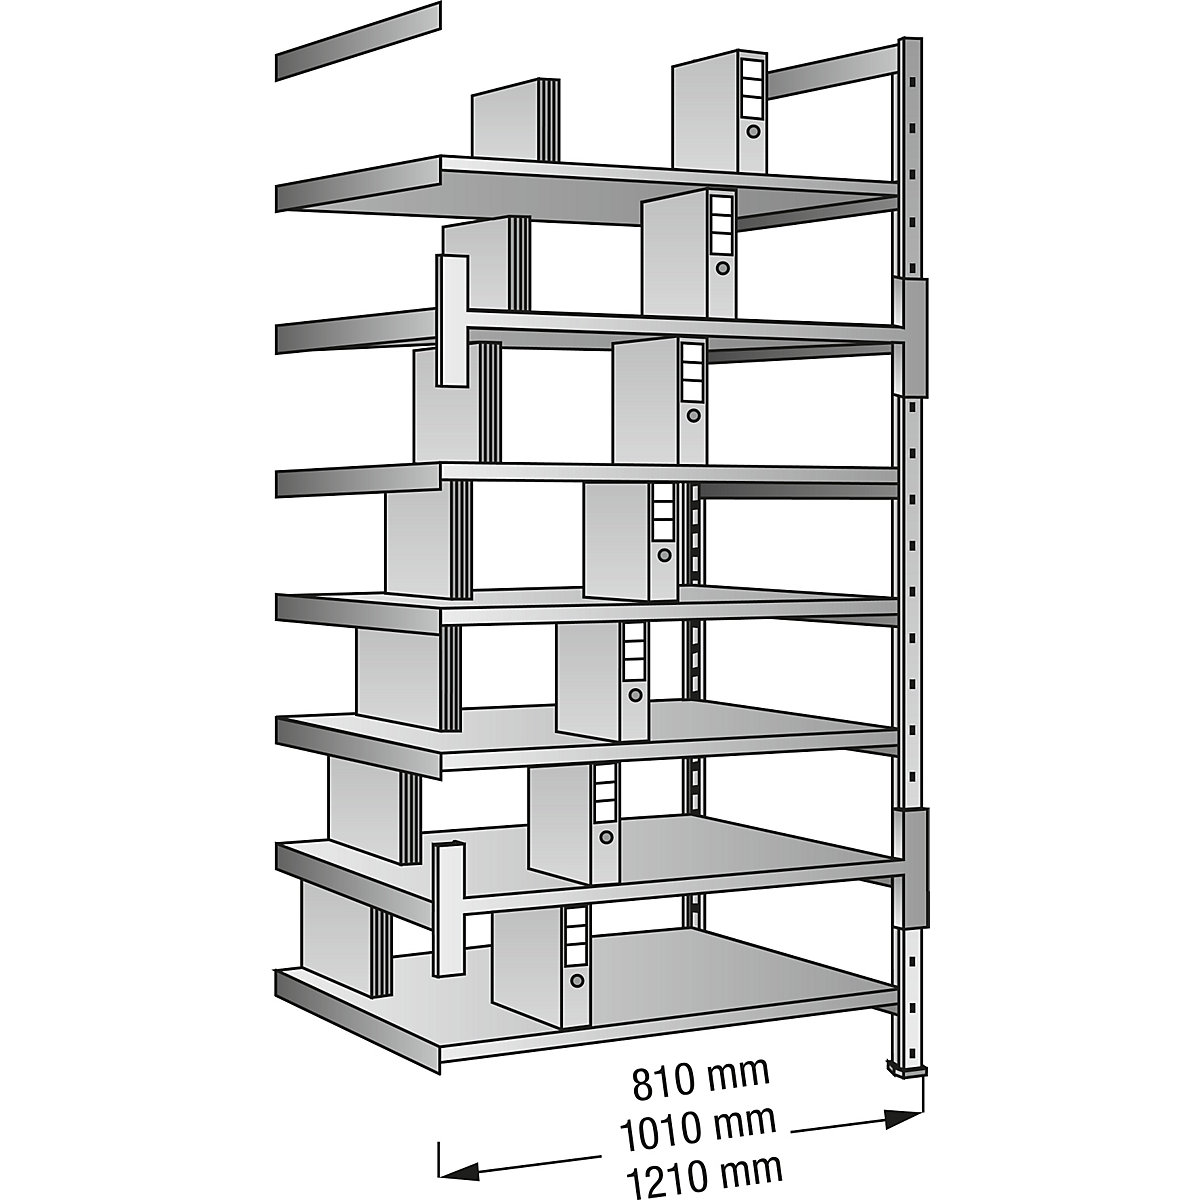 Boltless shelving units for files and archives, zinc plated